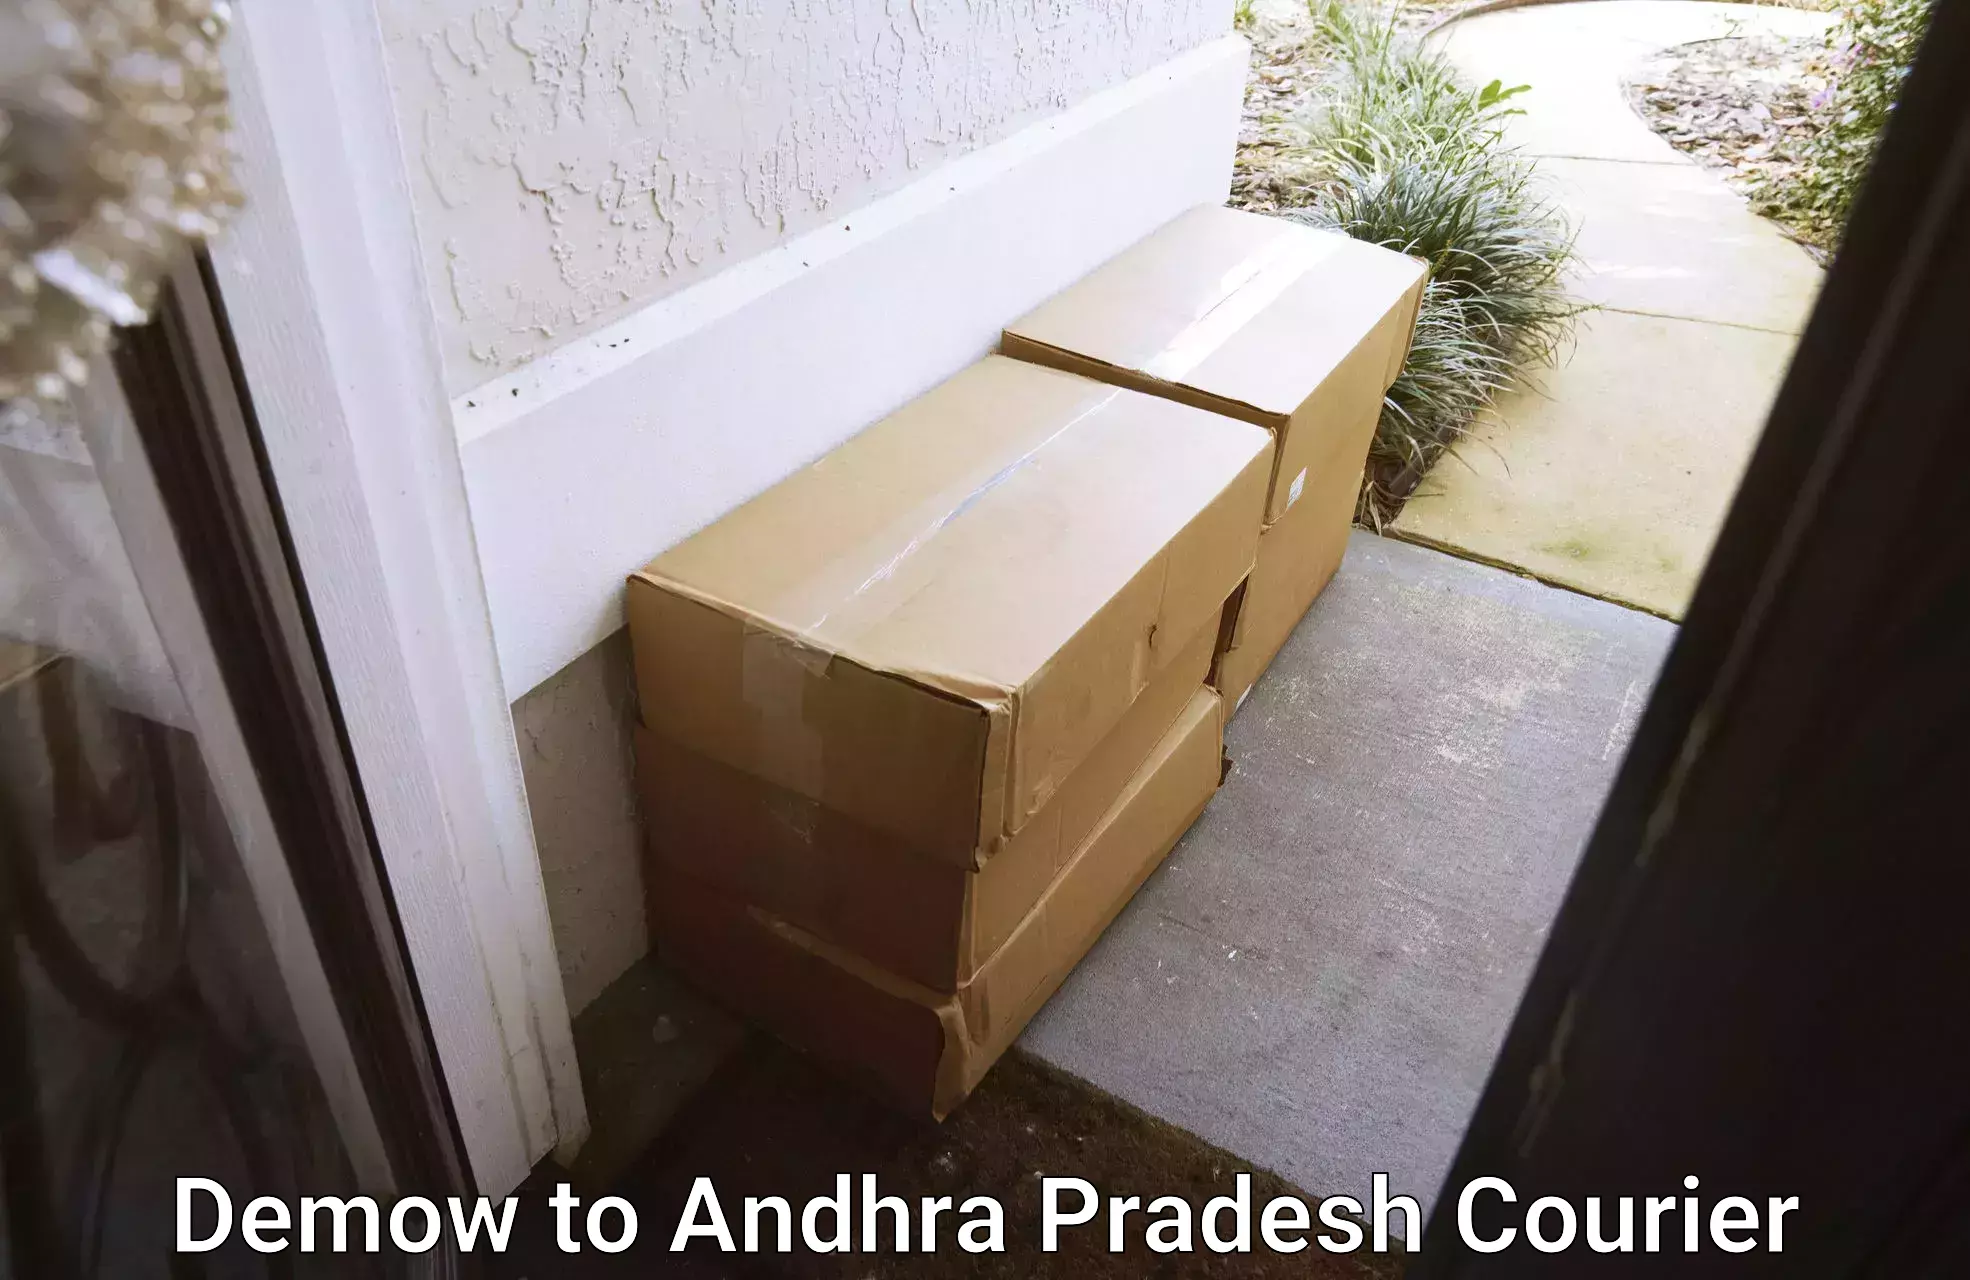 Round-the-clock parcel delivery Demow to Andhra Pradesh